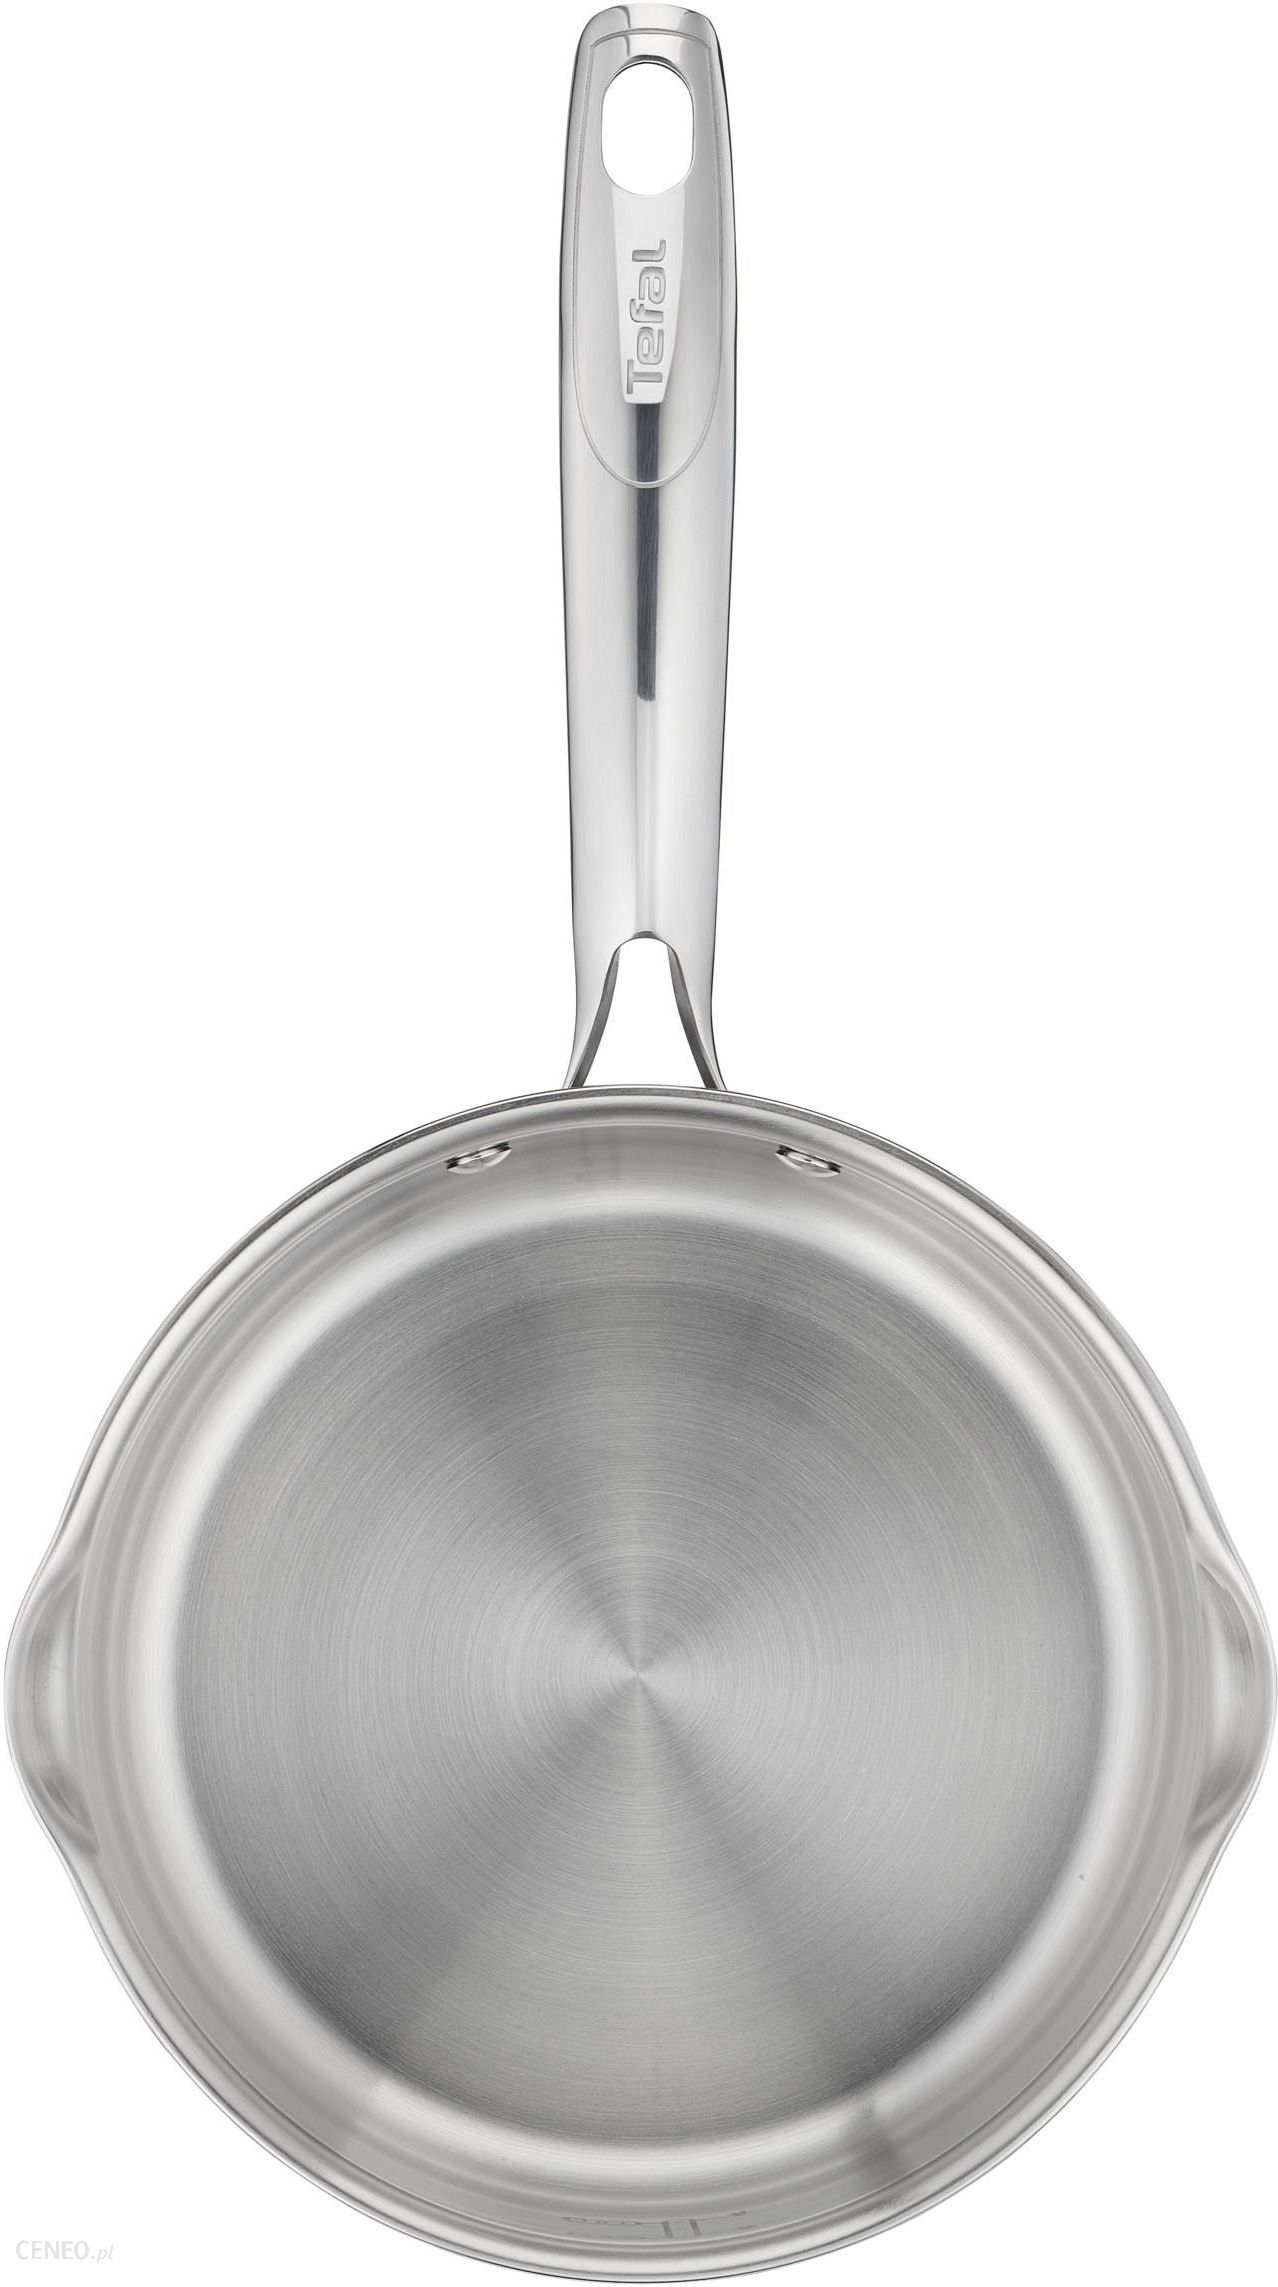 Tefal Duetto+ G7192355 18cm